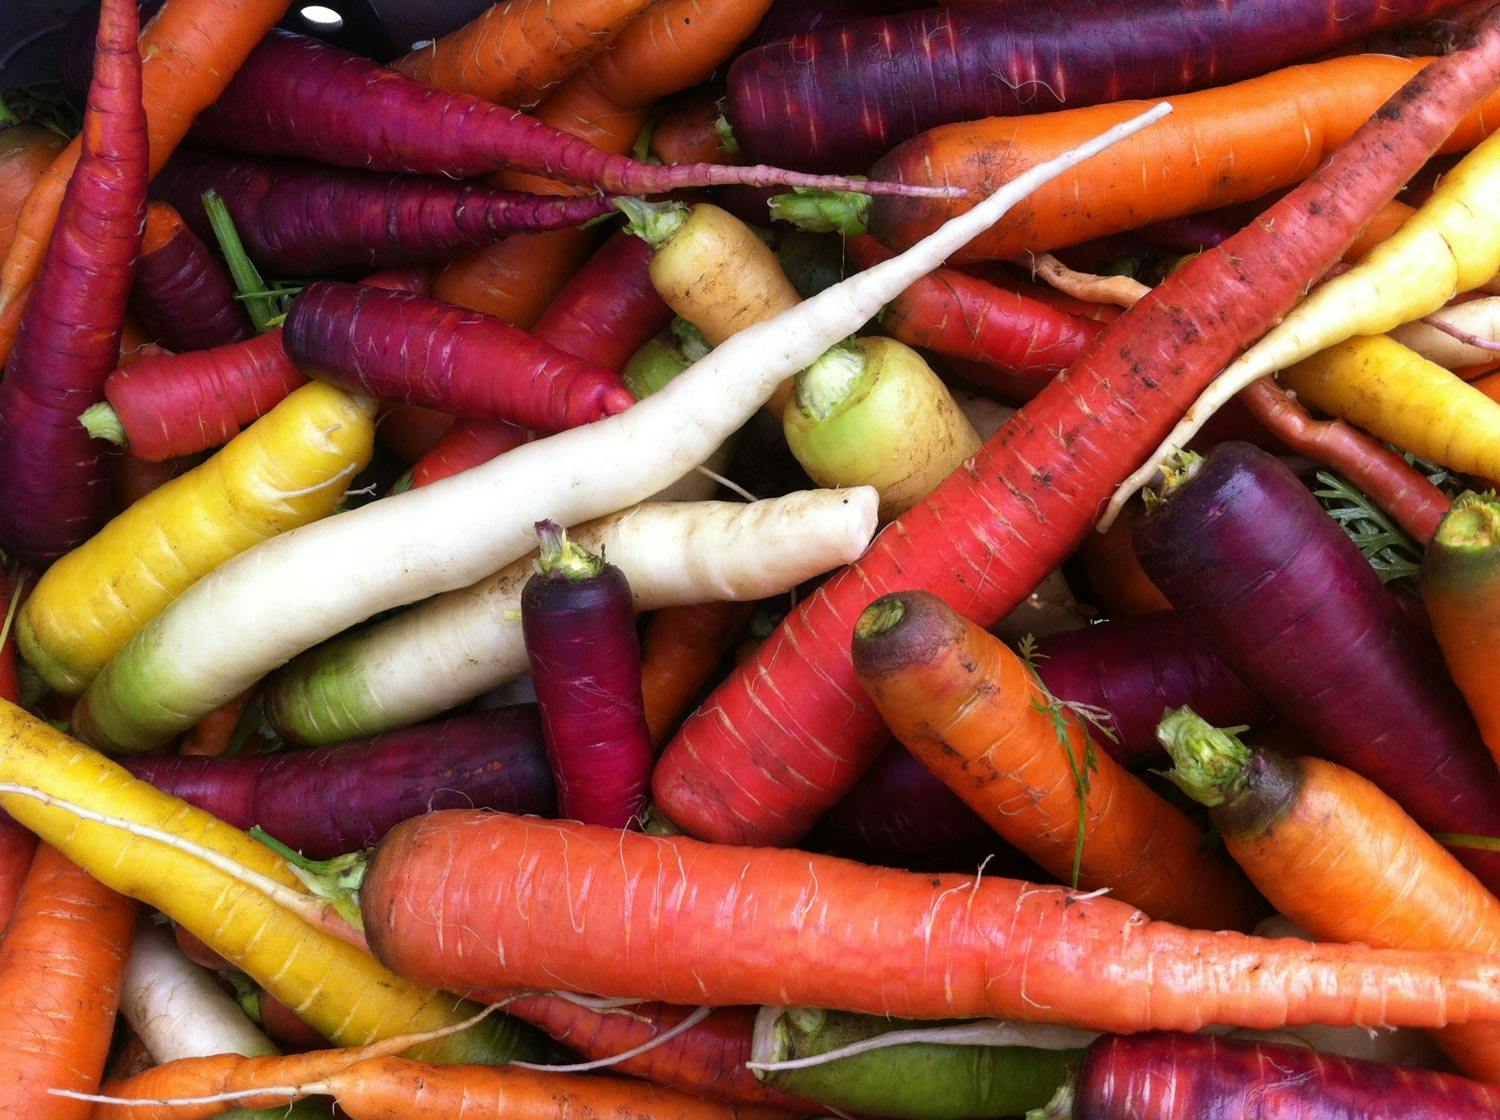 A beautiful mix of carrots, with colors ranging from deep purples to earthy yellow, is grown from open-source pledged seeds.